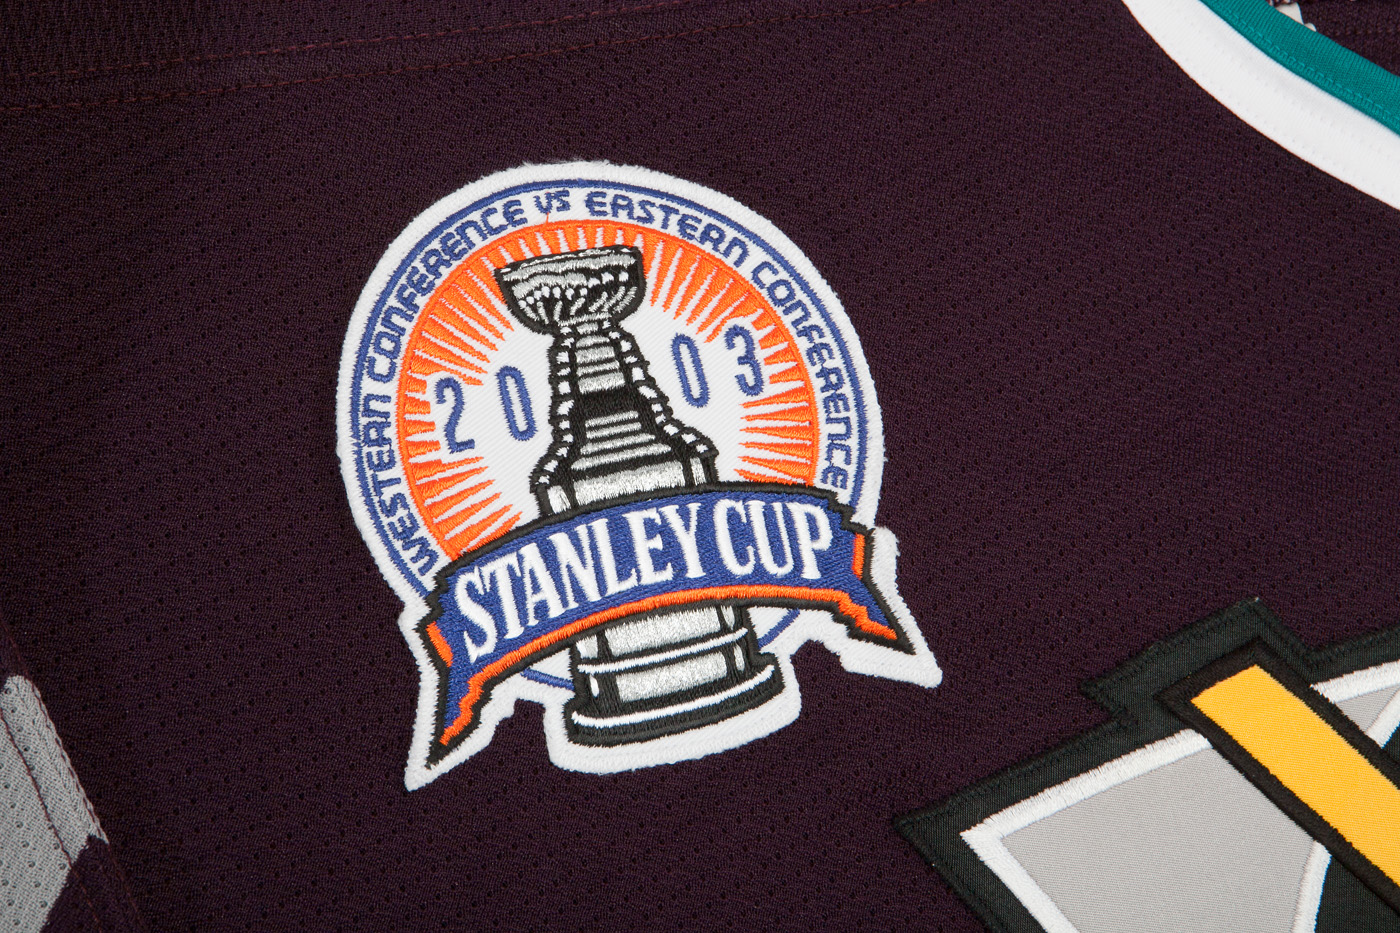 Lot Detail - 2002-03 PETR SYKORA ANAHEIM MIGHY DUCKS GAME WORN ROAD JERSEY  WITH 2003 STANLEY CUP FINALS PATCH (MEIGRAY, NSM COLLECTION)